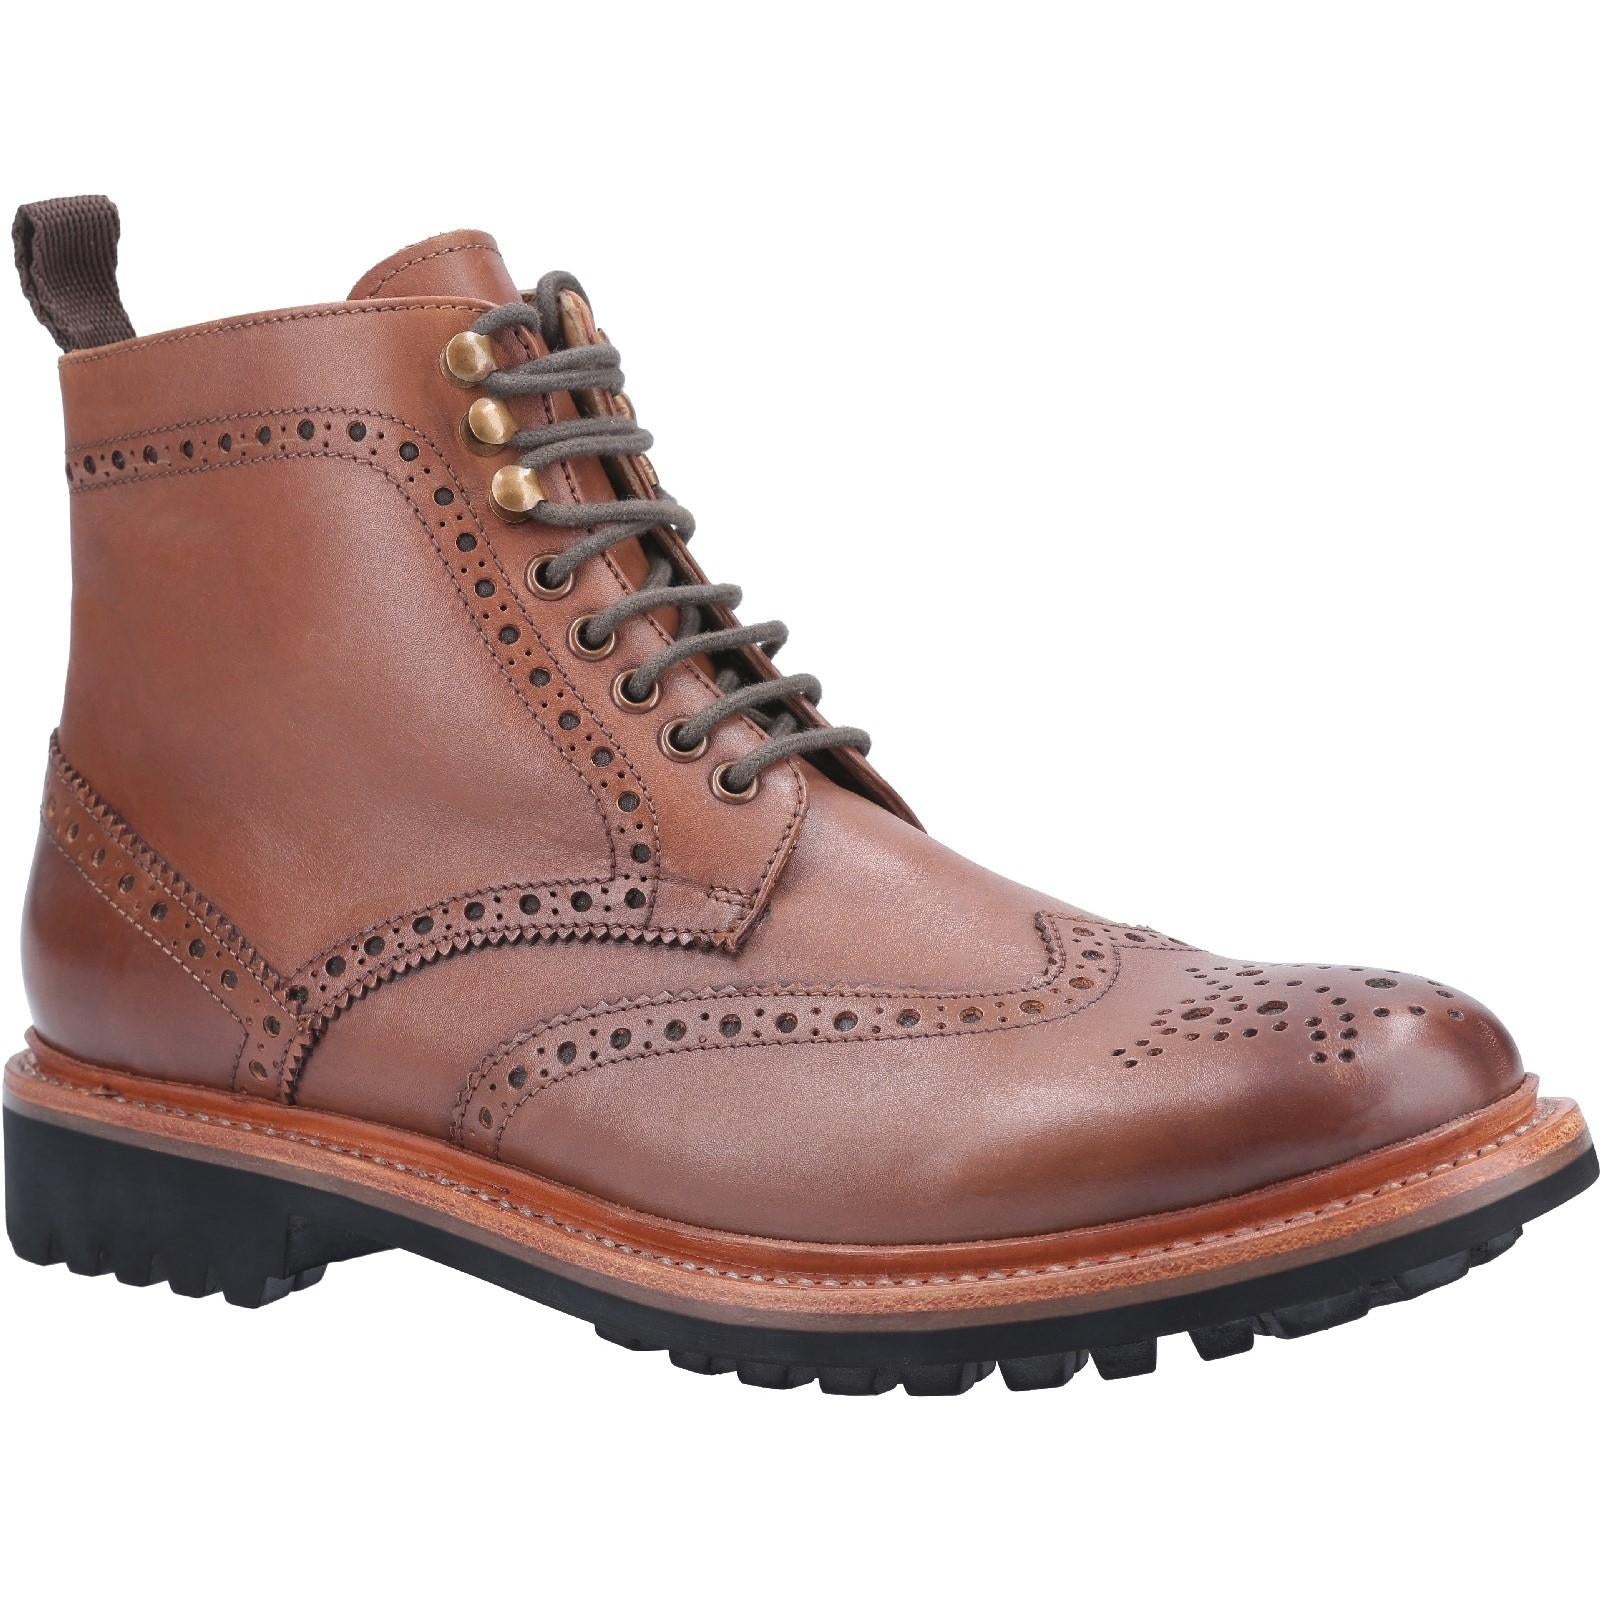 Cotswold Rissington brown leather lace up commando Goodyear welt brogue boots